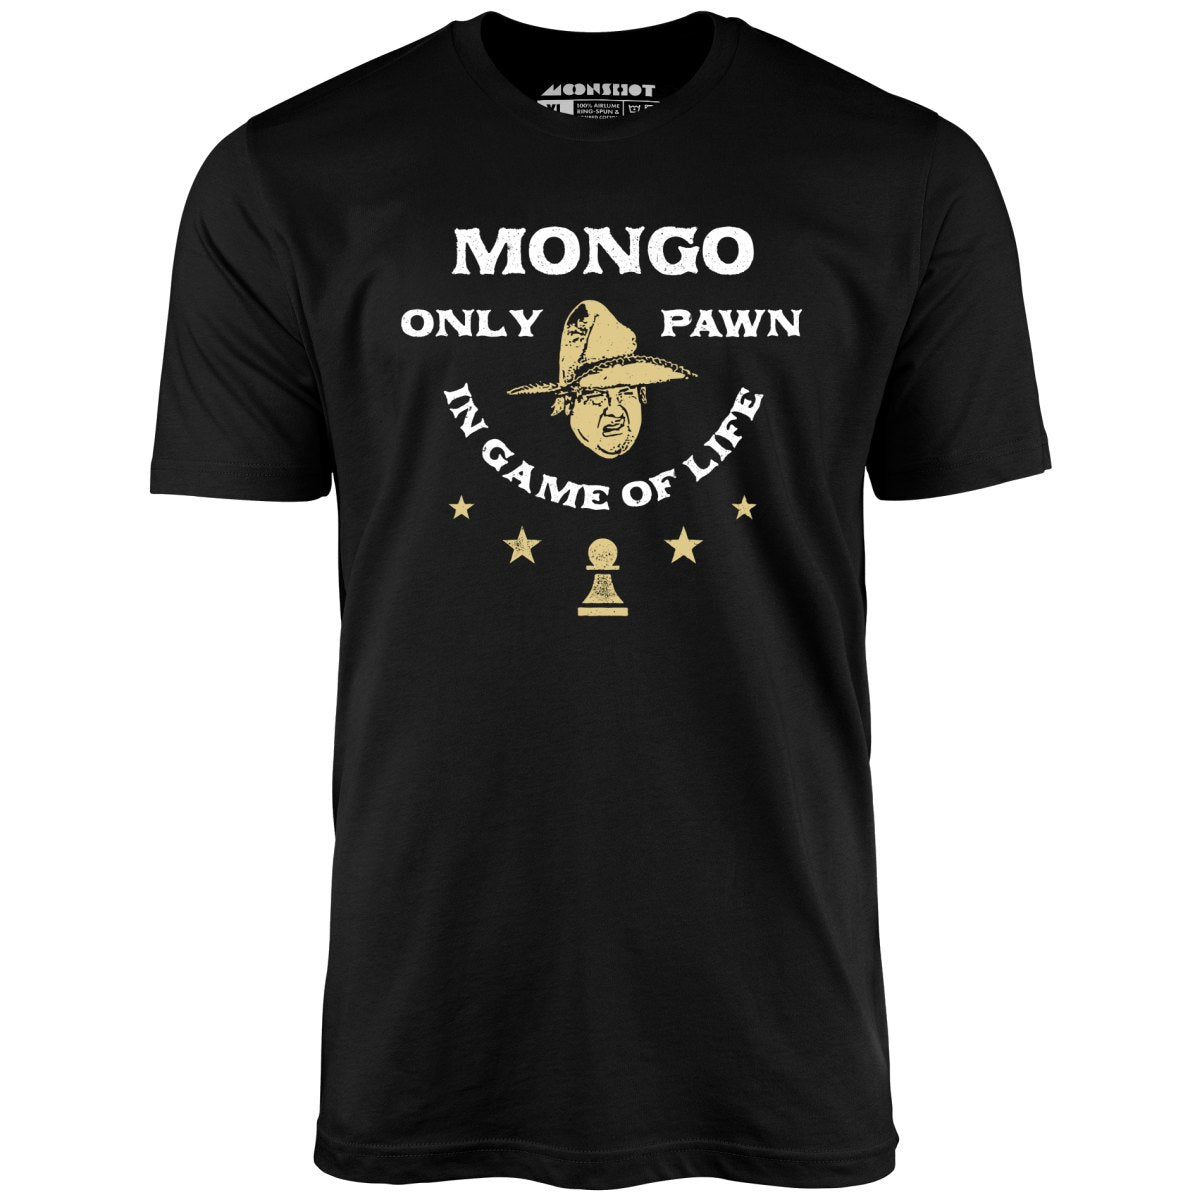 Mongo Only Pawn in Game of Life - Unisex T-Shirt